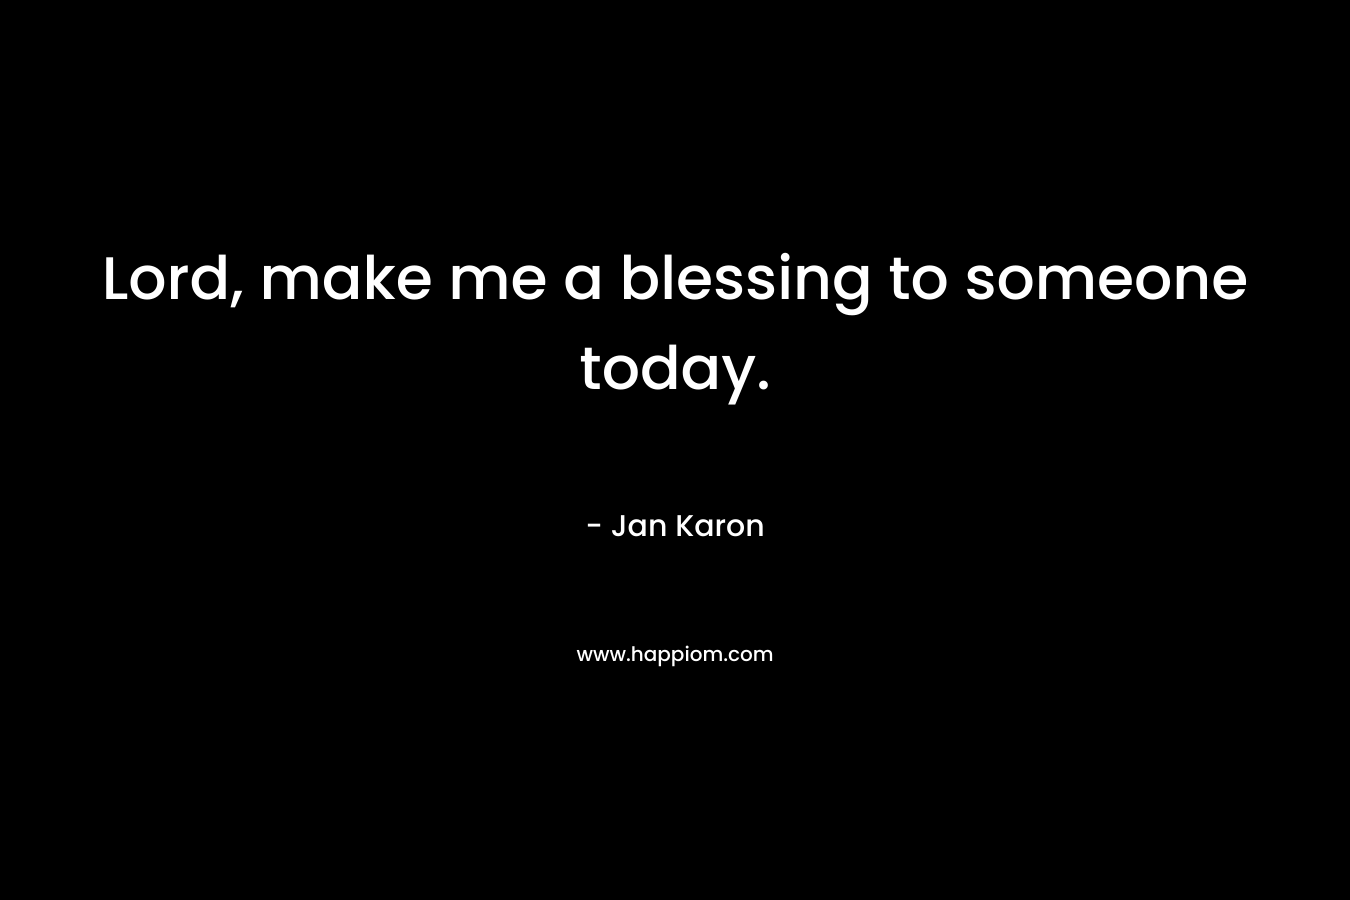 Lord, make me a blessing to someone today.